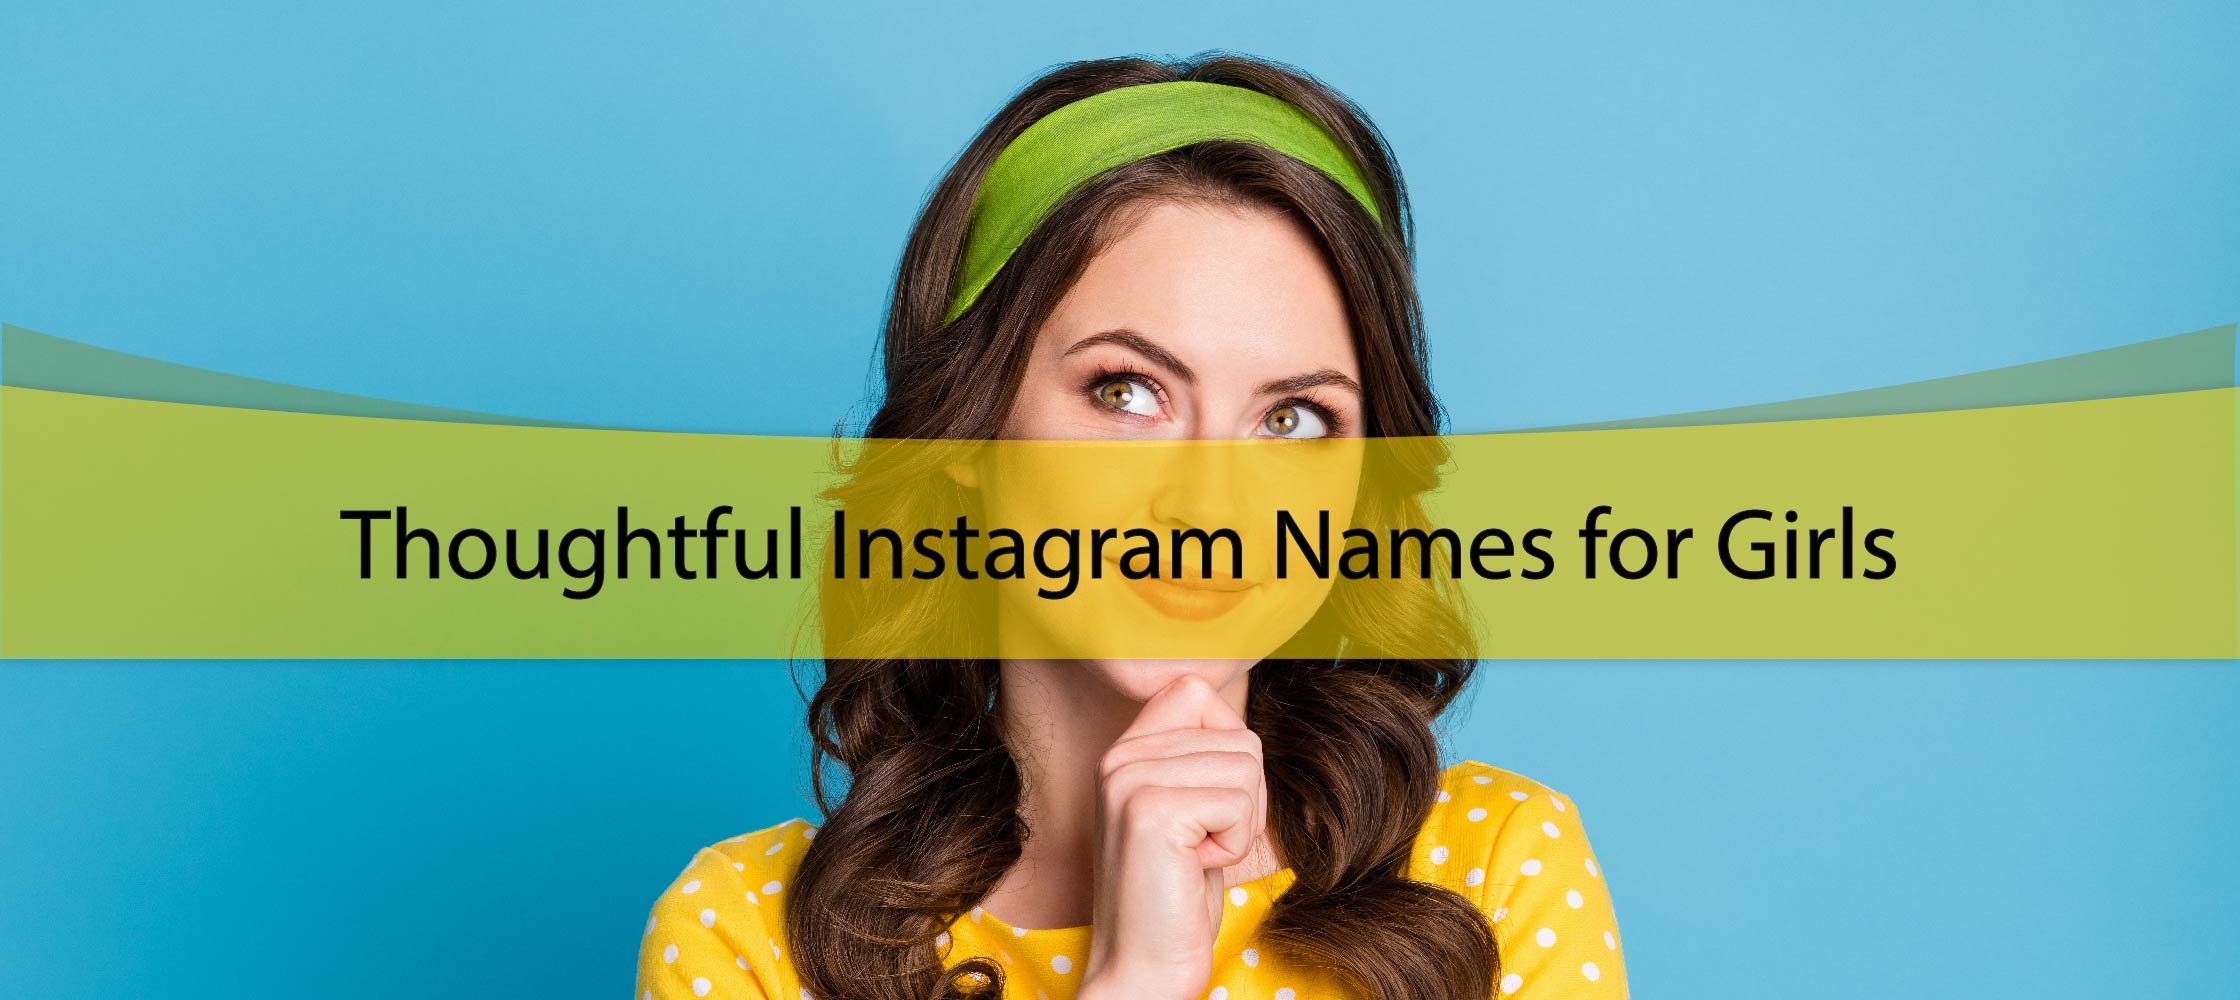 Thoughtful Instagram Names for Girls